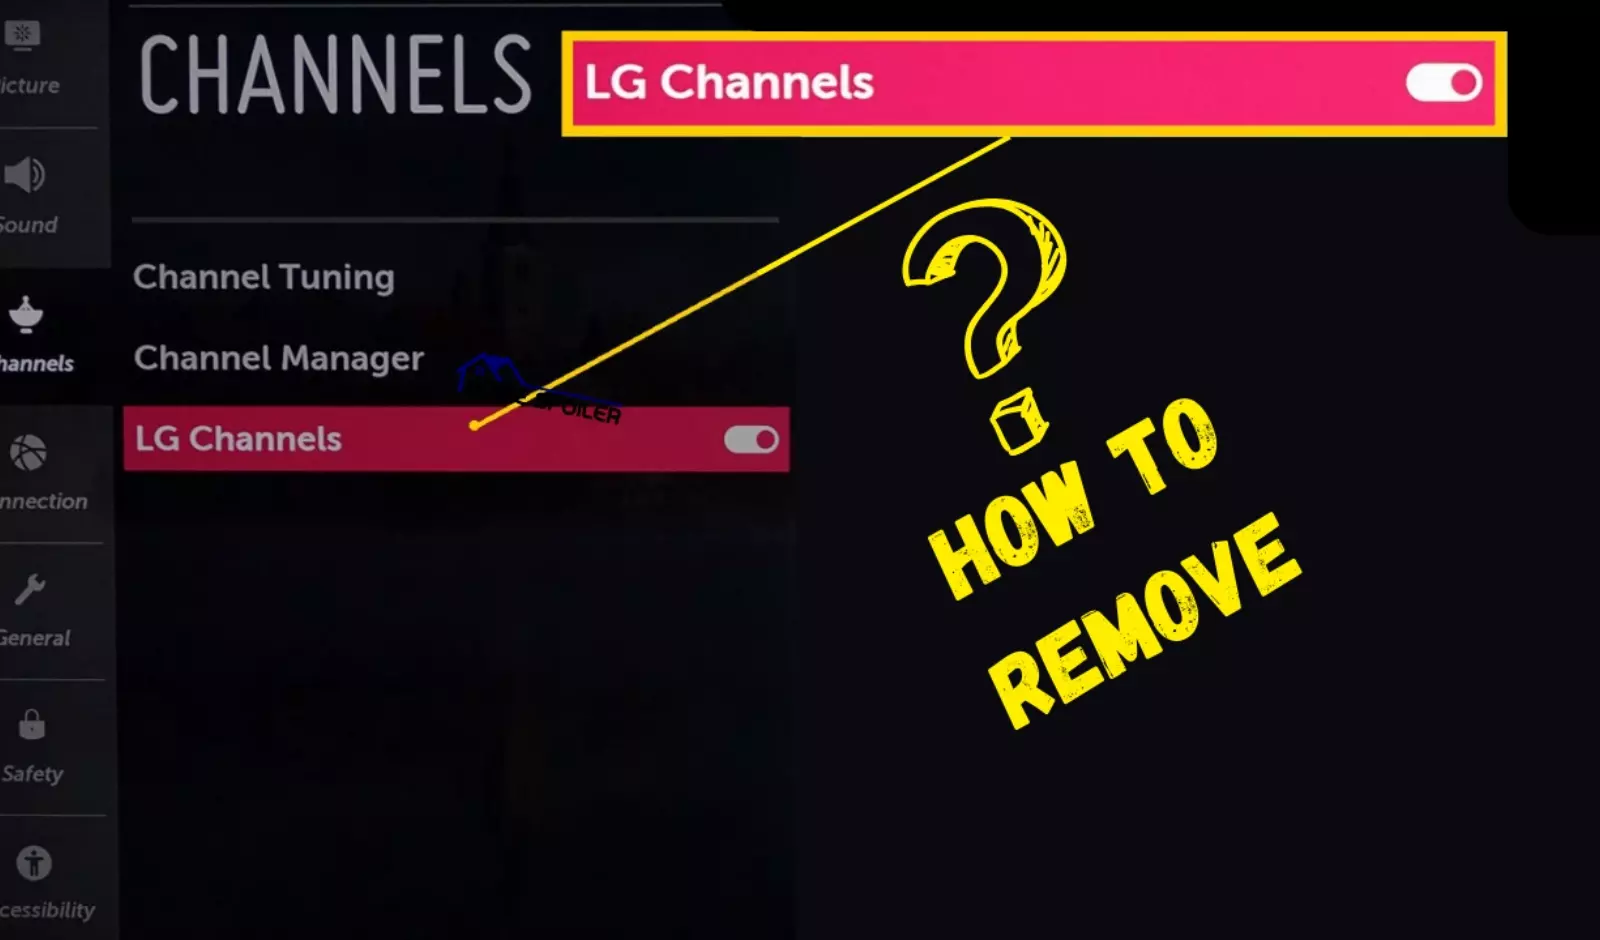 How To Remove LG Channels App From LG TV